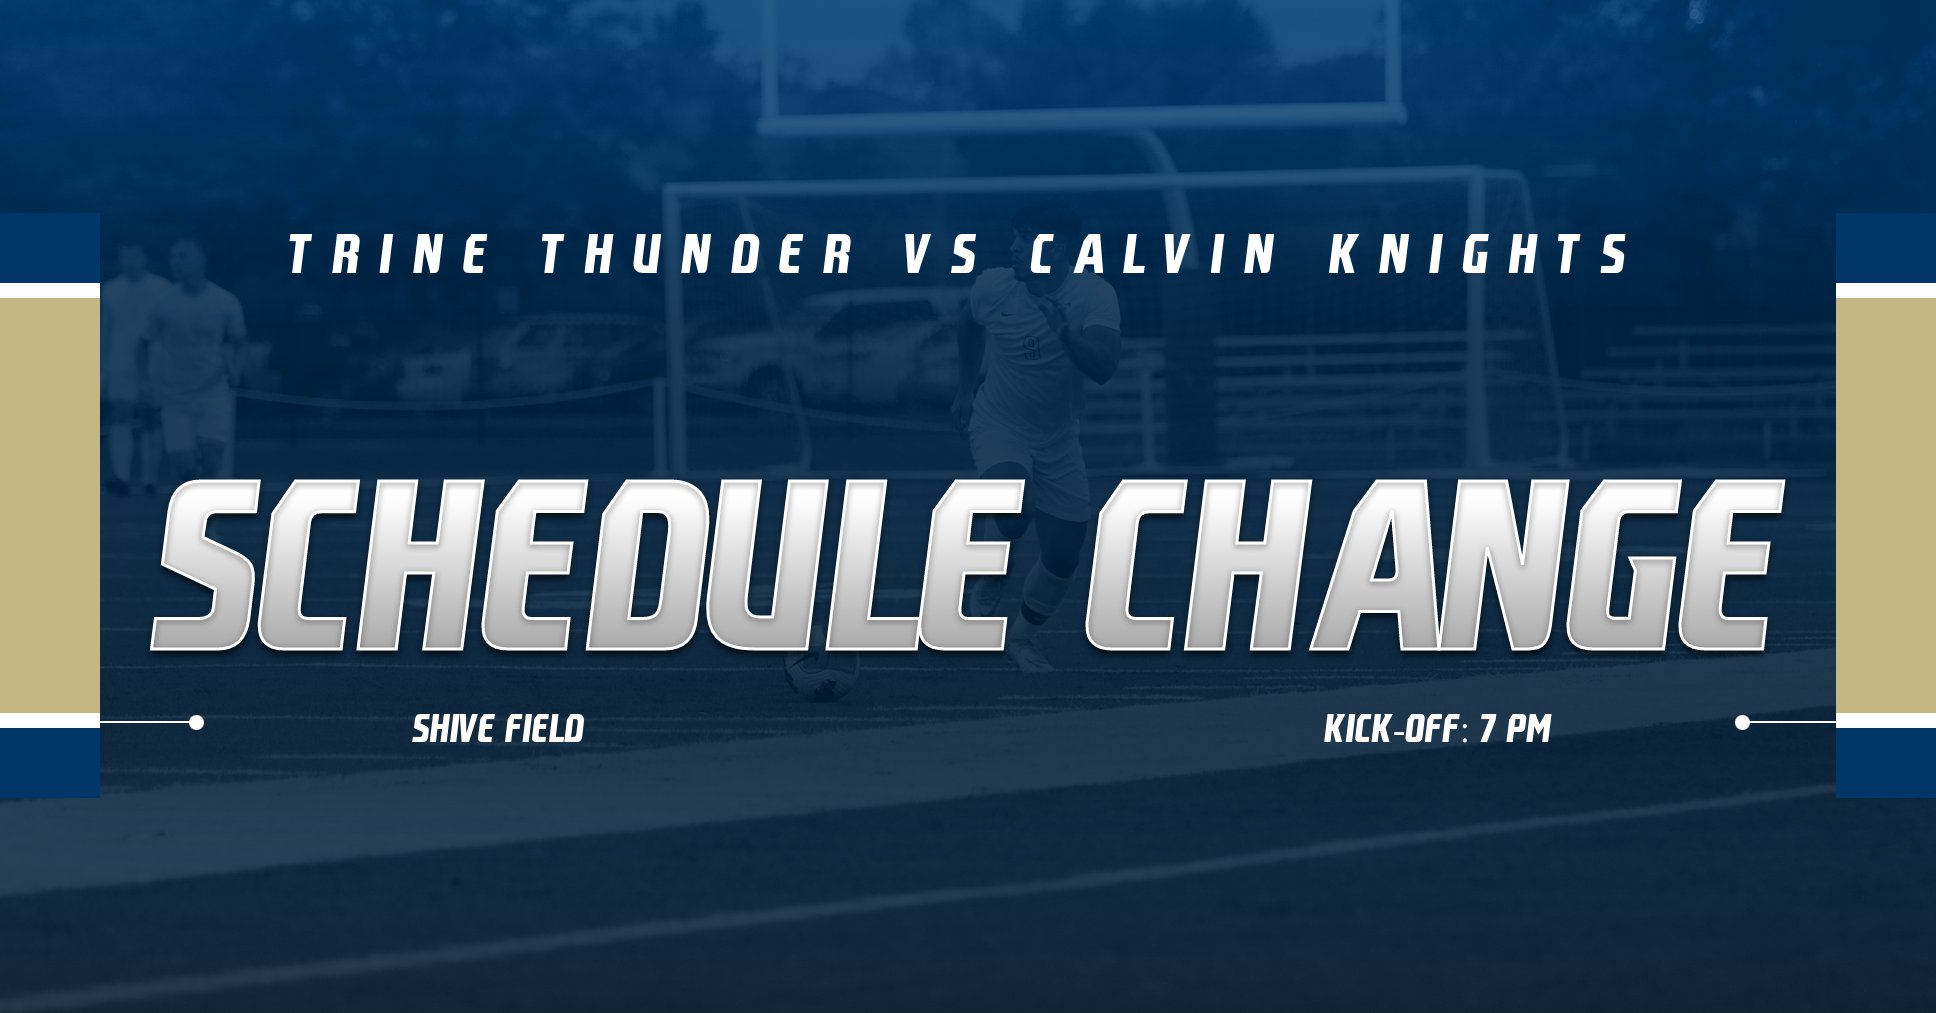 Trine vs Calvin Moved to Shive Field at 7 pm Tuesday